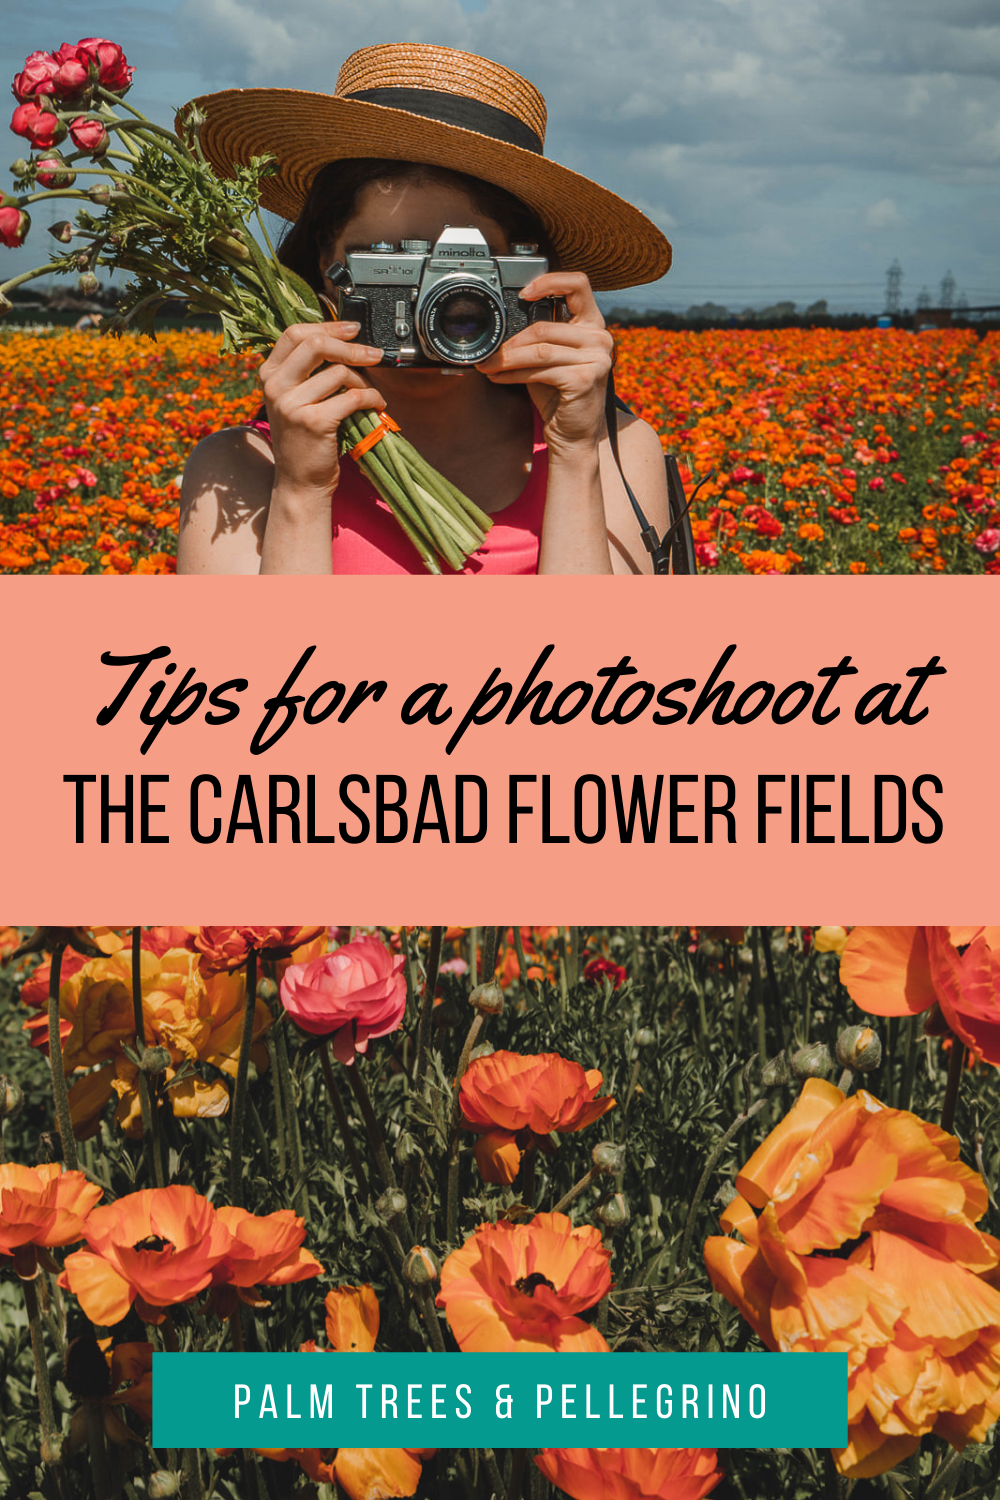 The Carlsbad Flower Fields Photoshoot Tips - Palm Trees and Pellegrino, San Diego things to do, San Diego flower fields